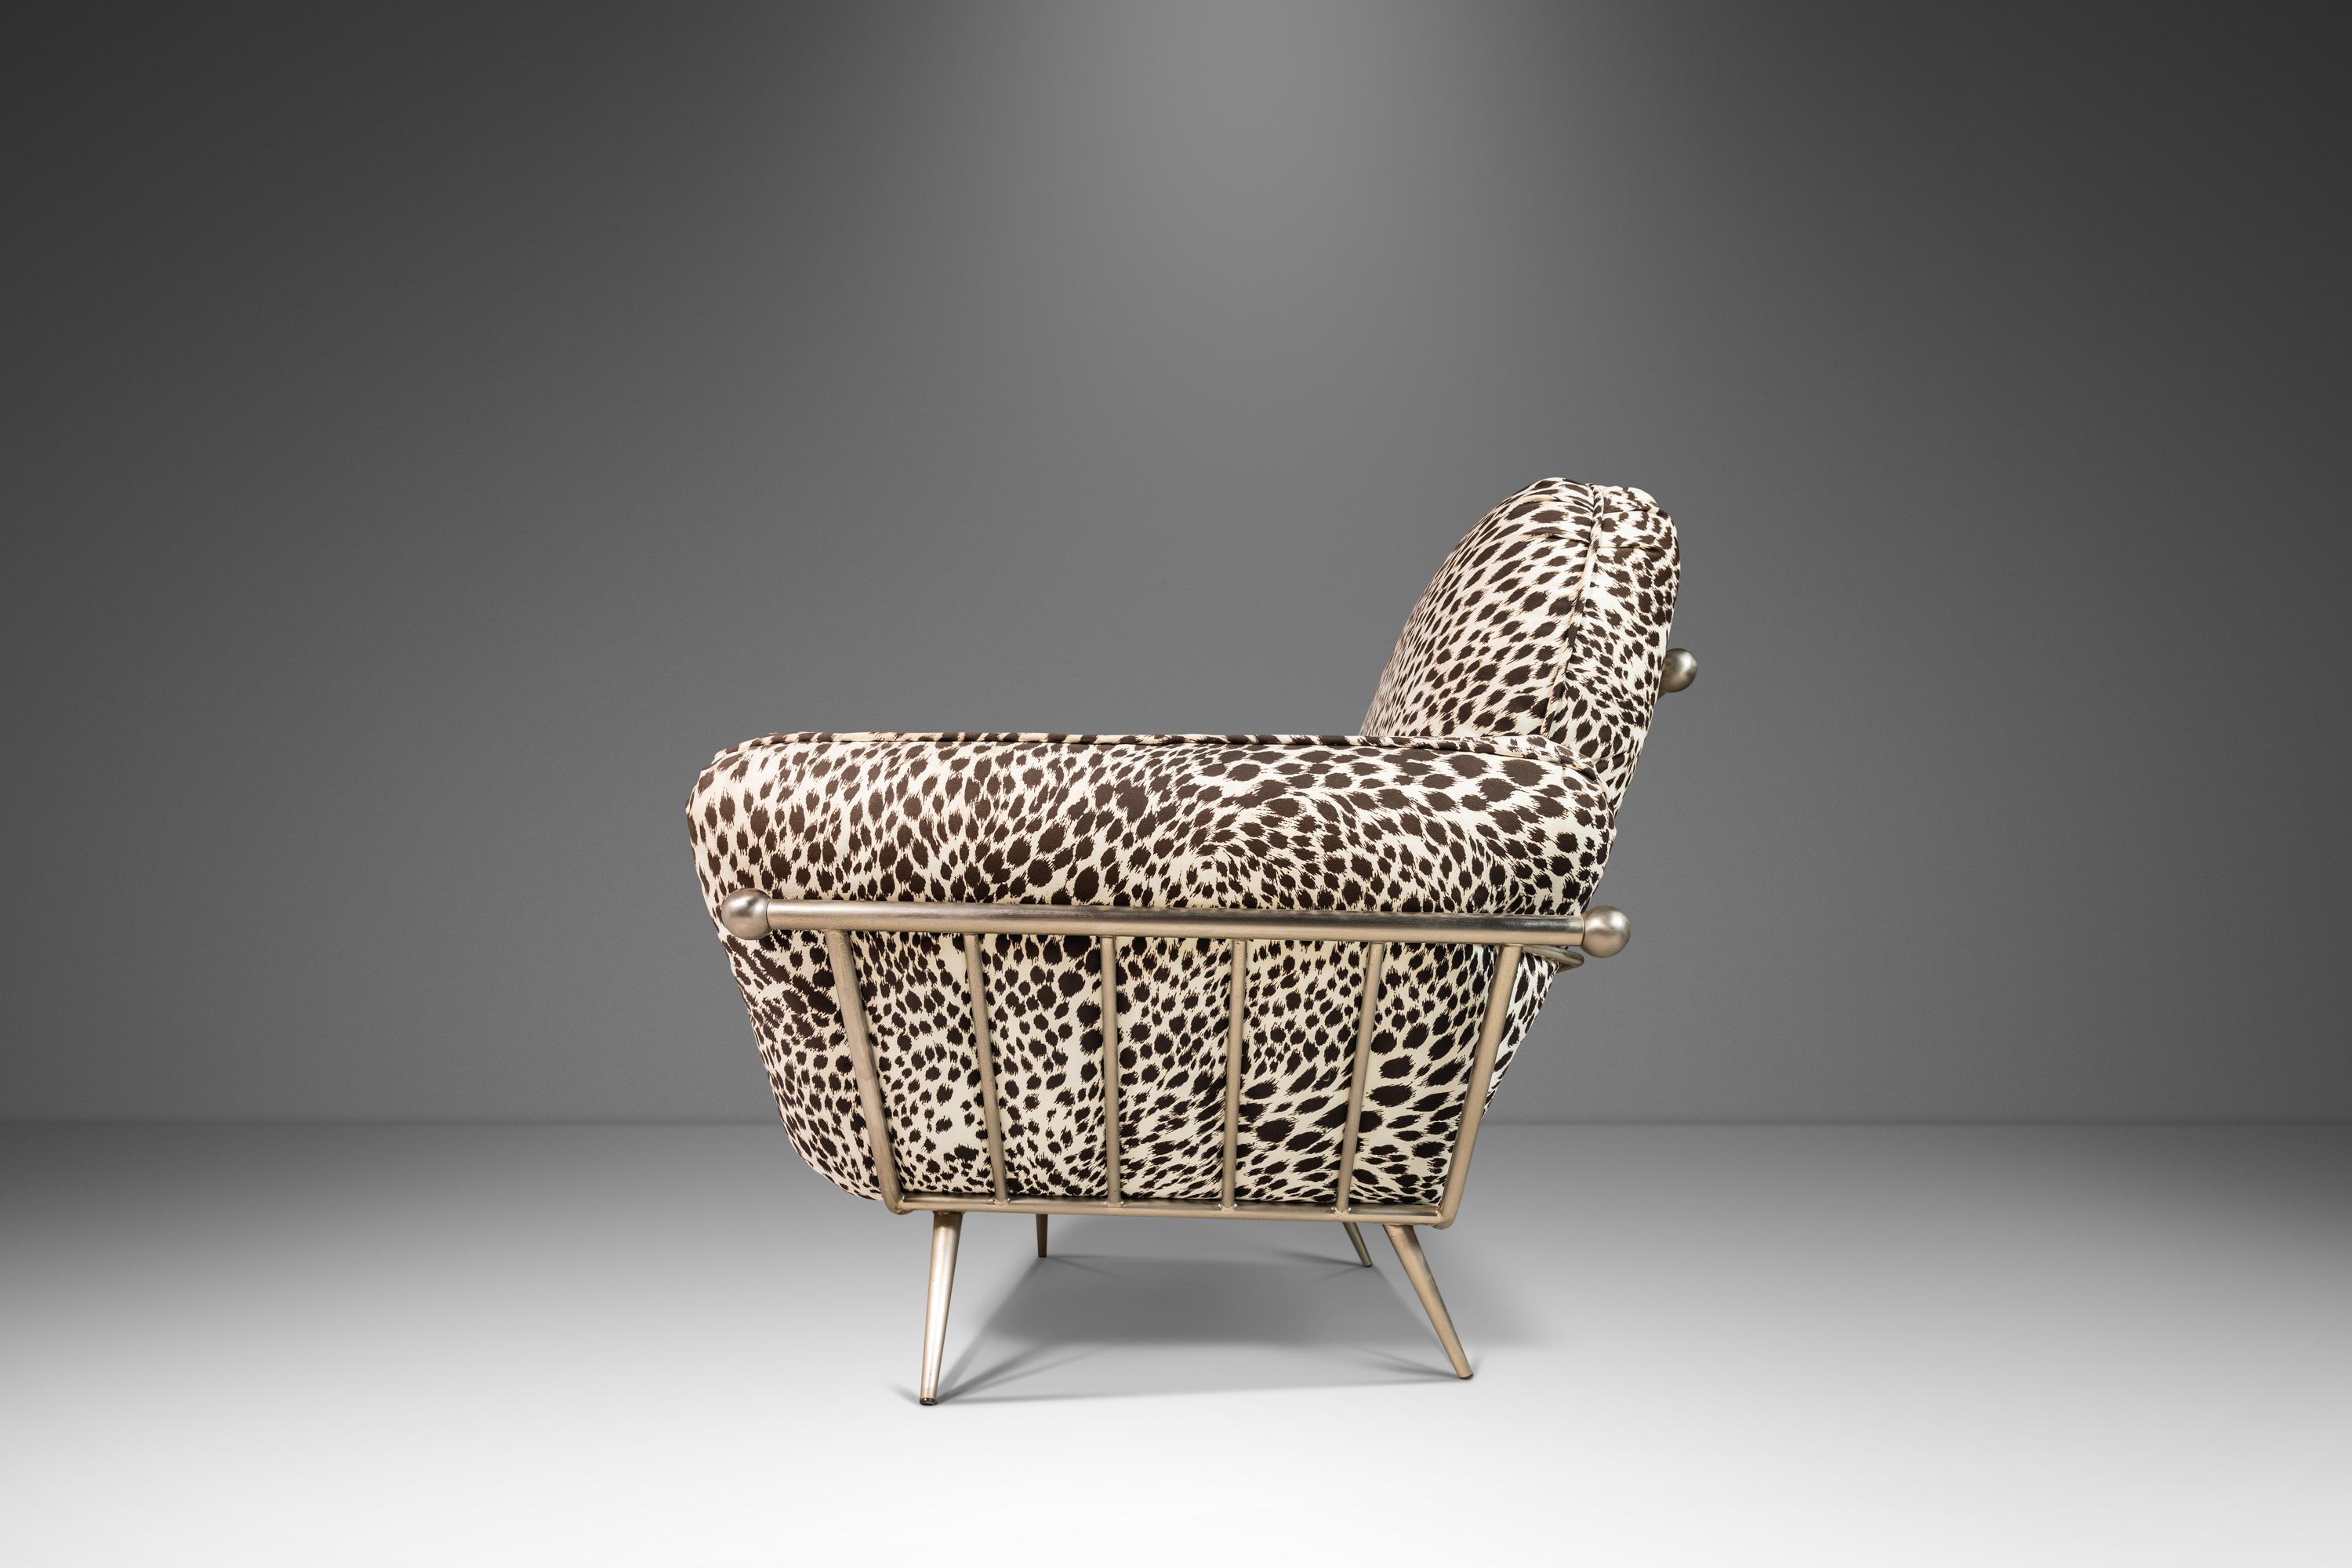 Lounge Chair in Animal Print for Carson's Attributed to Milo Baughman, c. 1980's For Sale 7